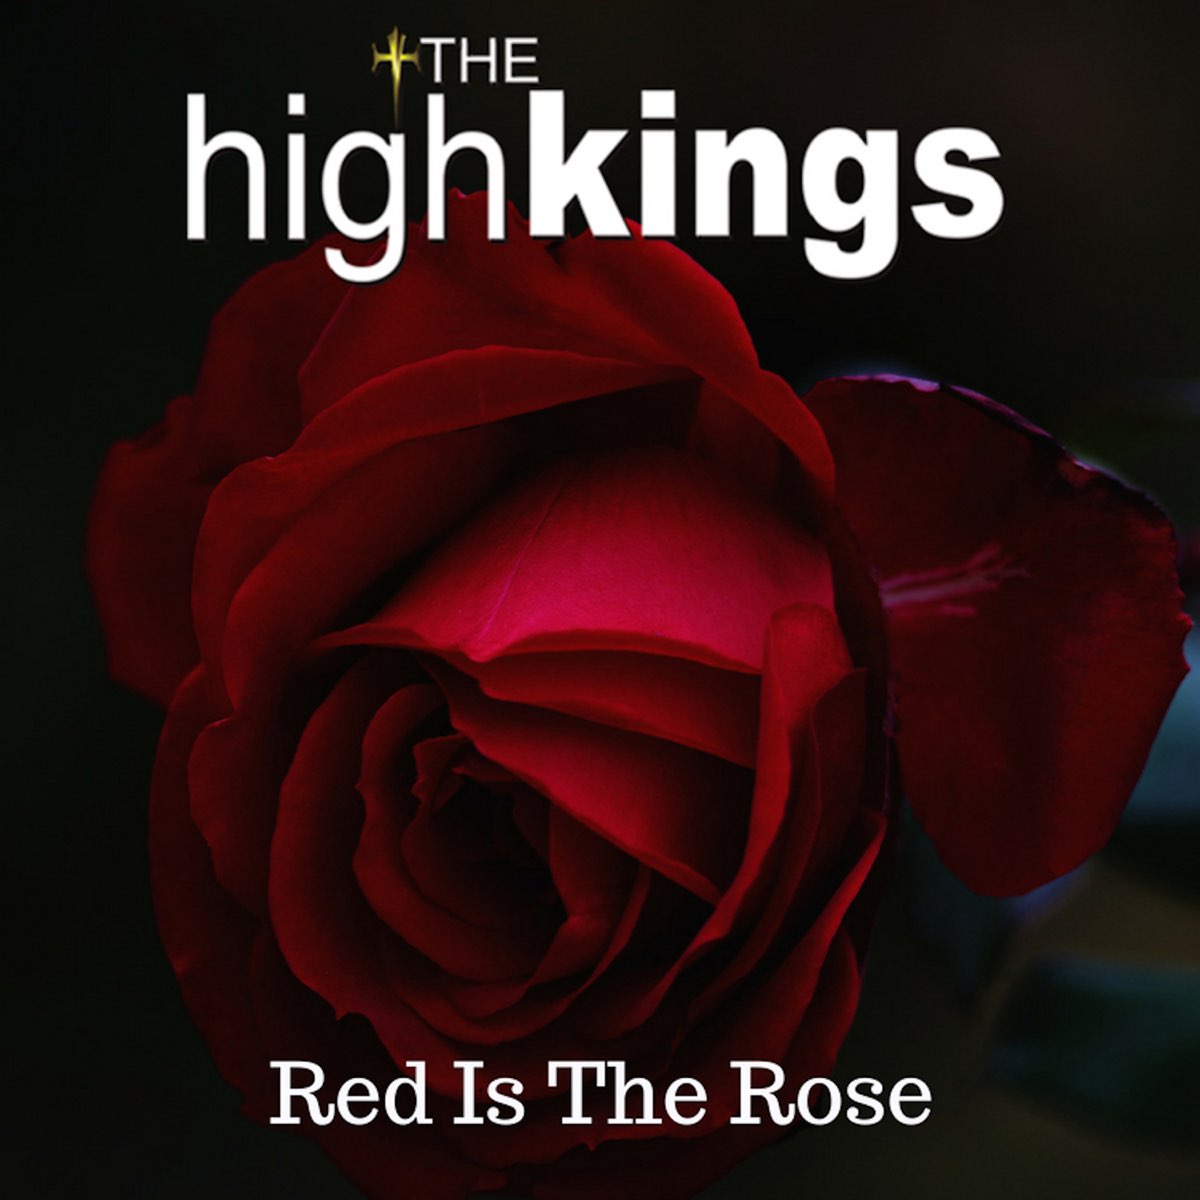 The high kings. Обложка альбома Red Rose. Розовый альбом Red.